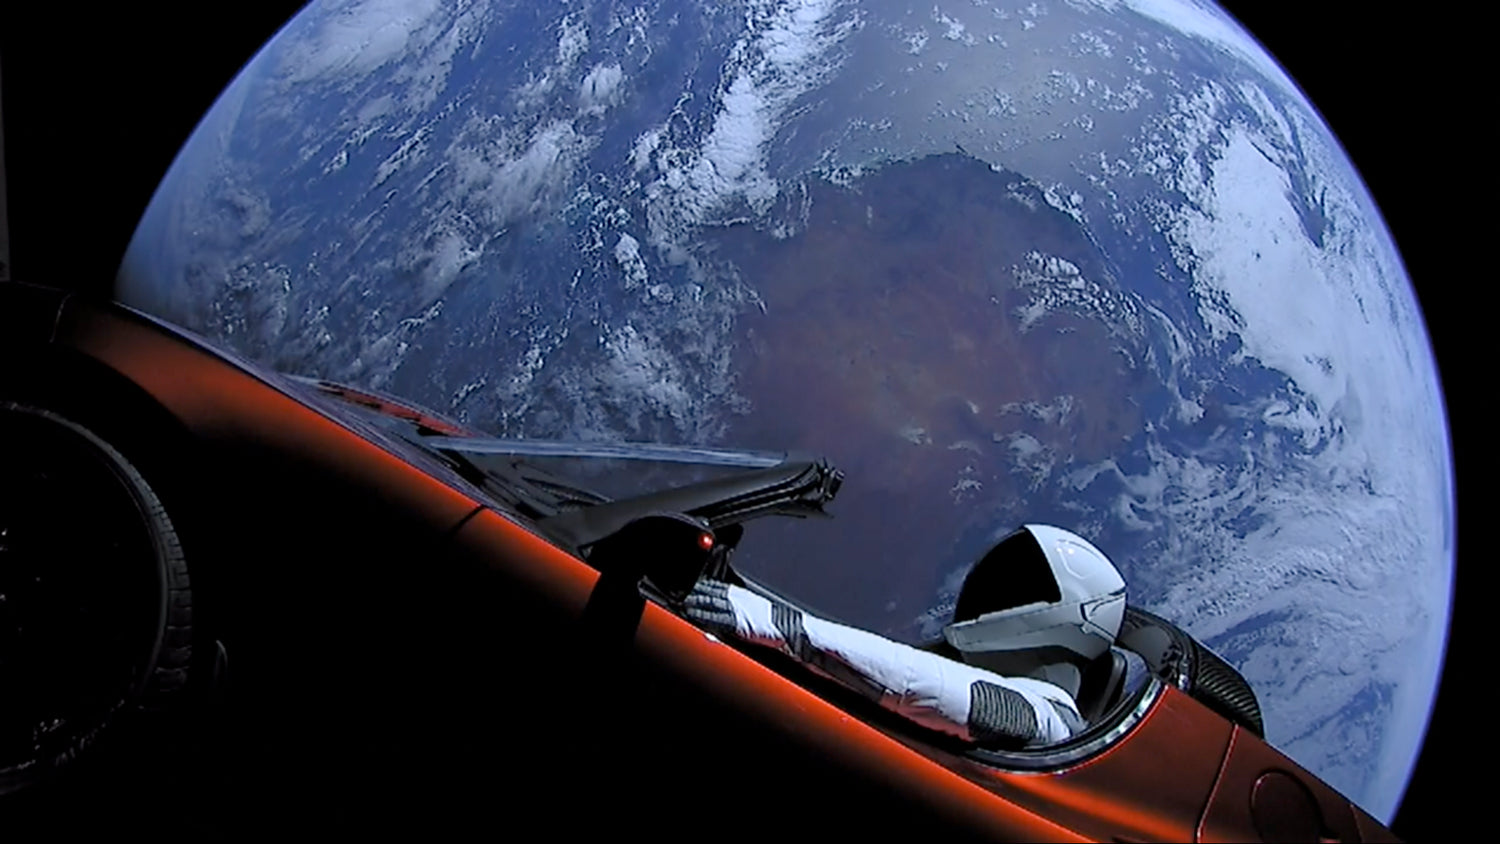 SpaceX's Starman cruising space in a Tesla makes a close approach to Mars